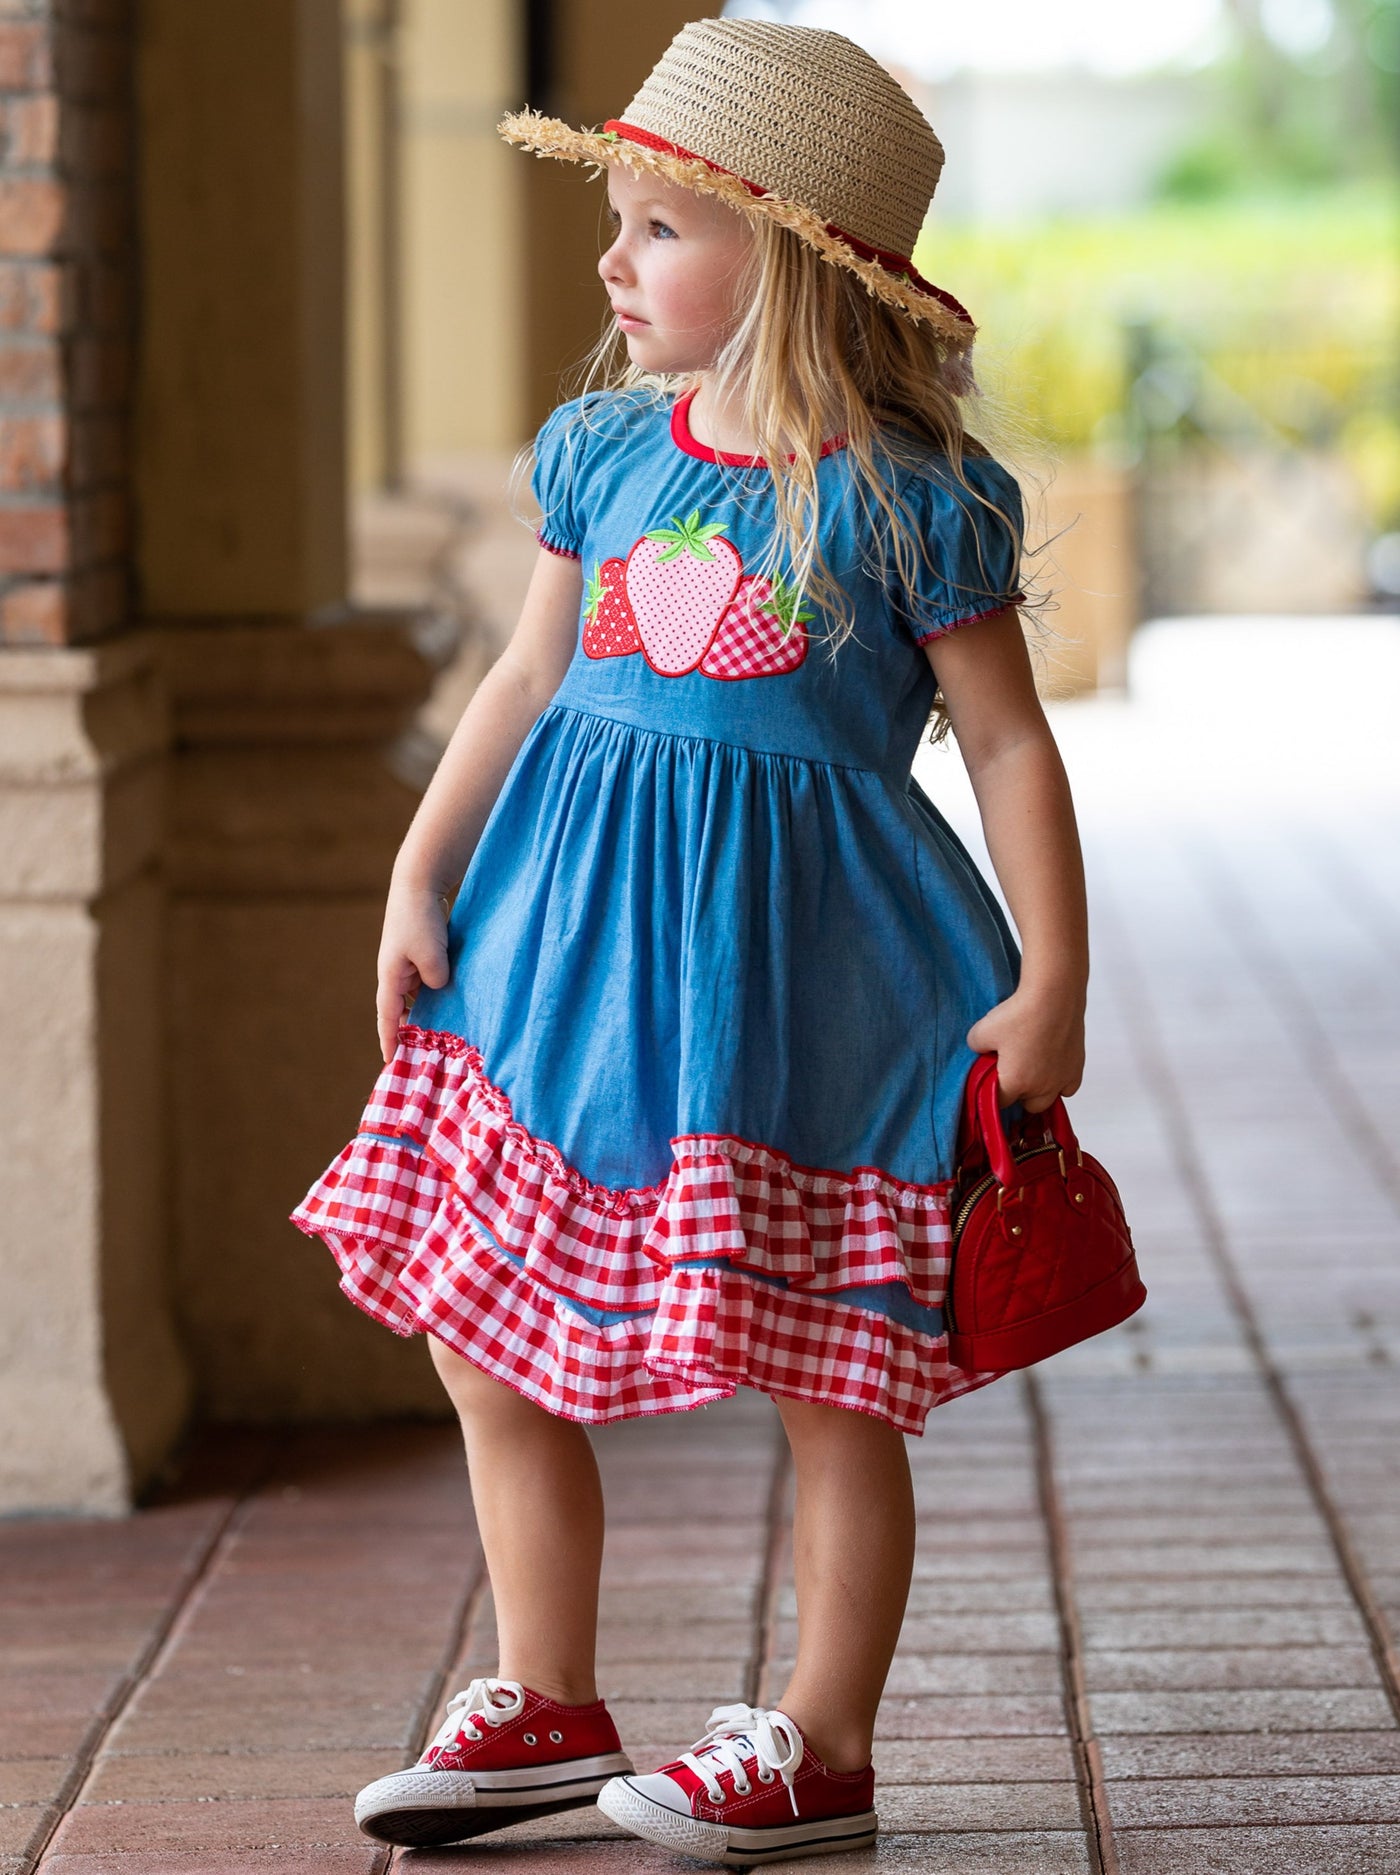 girls denim dress has a strawberries applique and red and white plaid ruffles